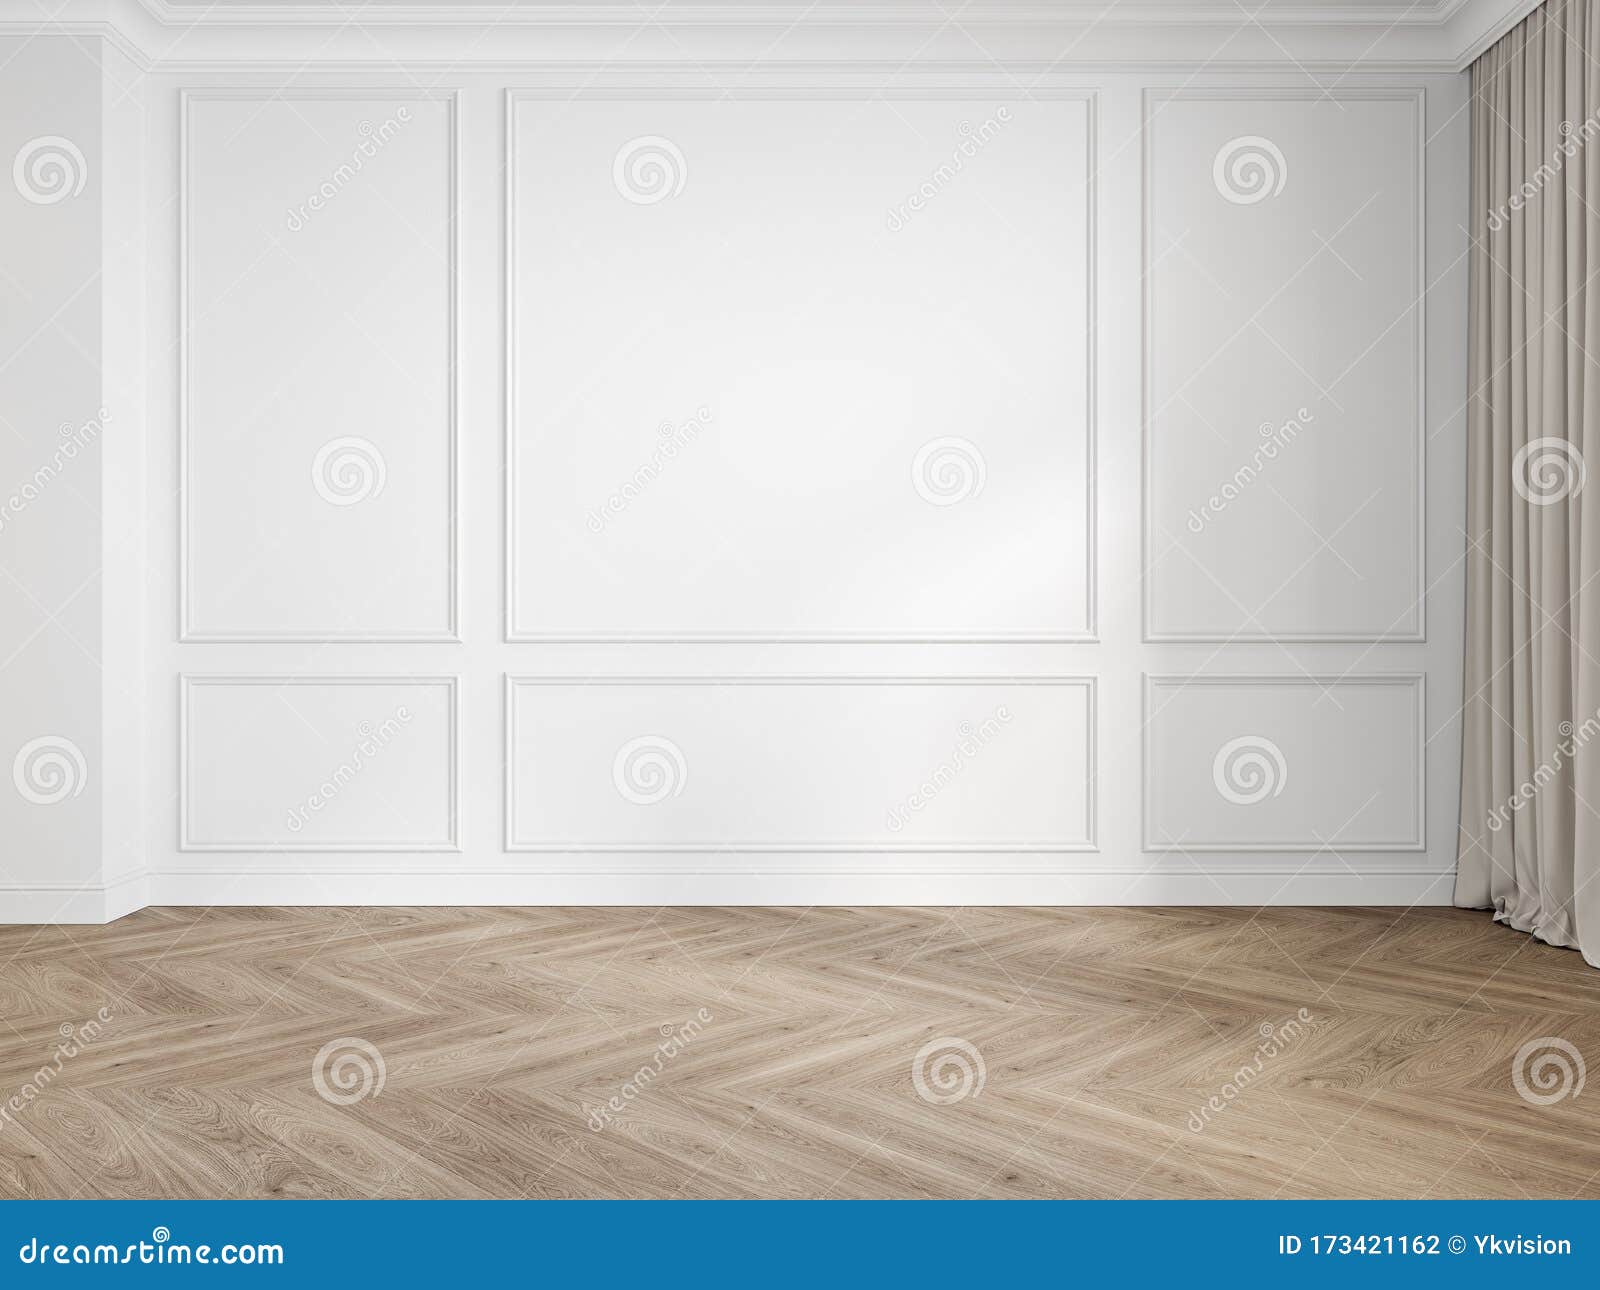 modern classic white interior blank wall with moldings, panelling, wood floor, curtain.